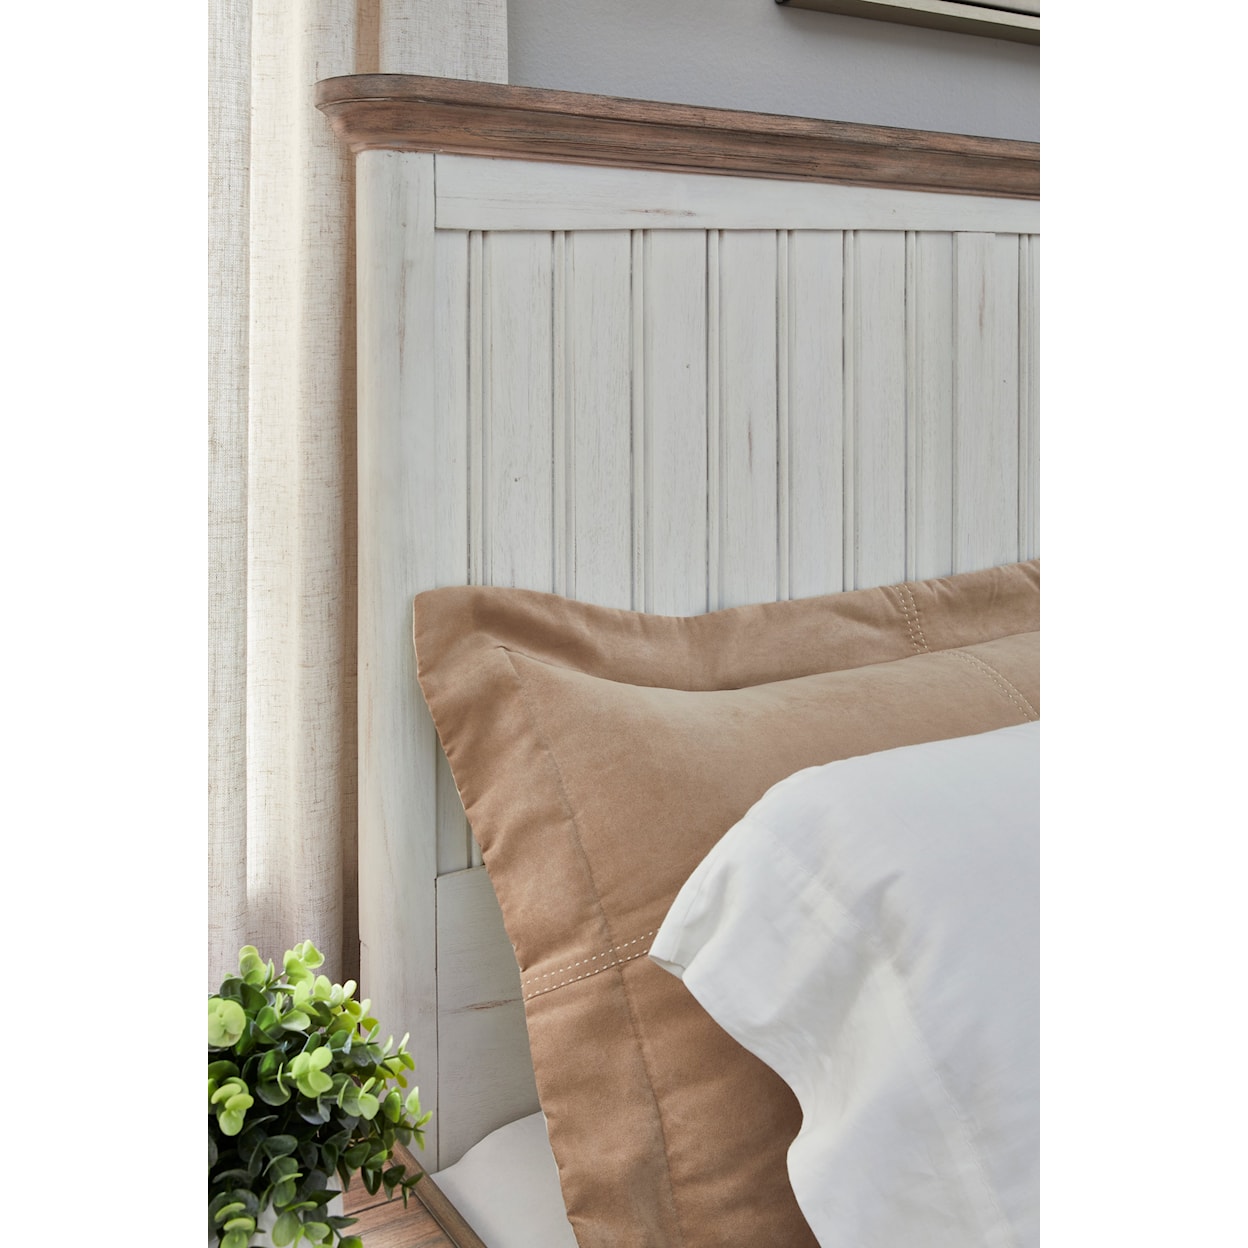 American Woodcrafters Beach Comber King Panel Bed